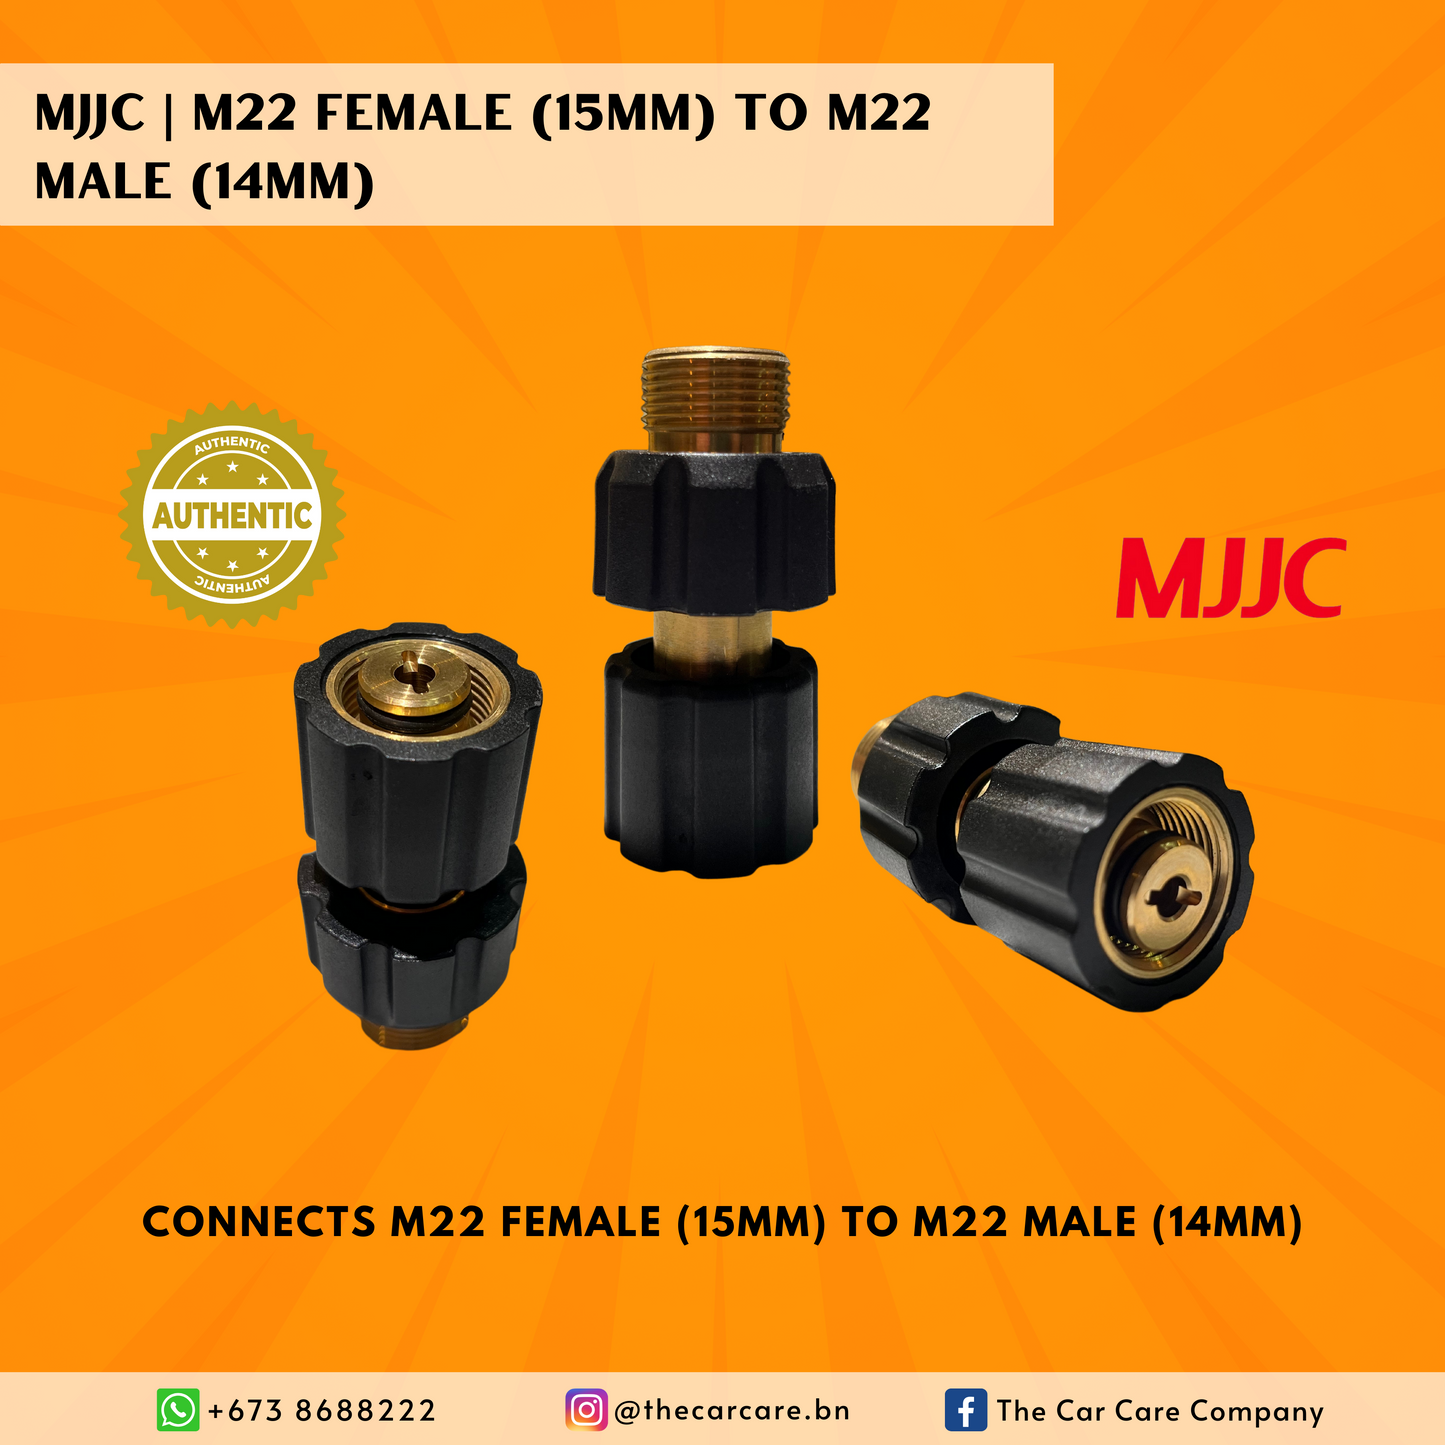 M22 Female (15mm) to M22 Male (14mm)